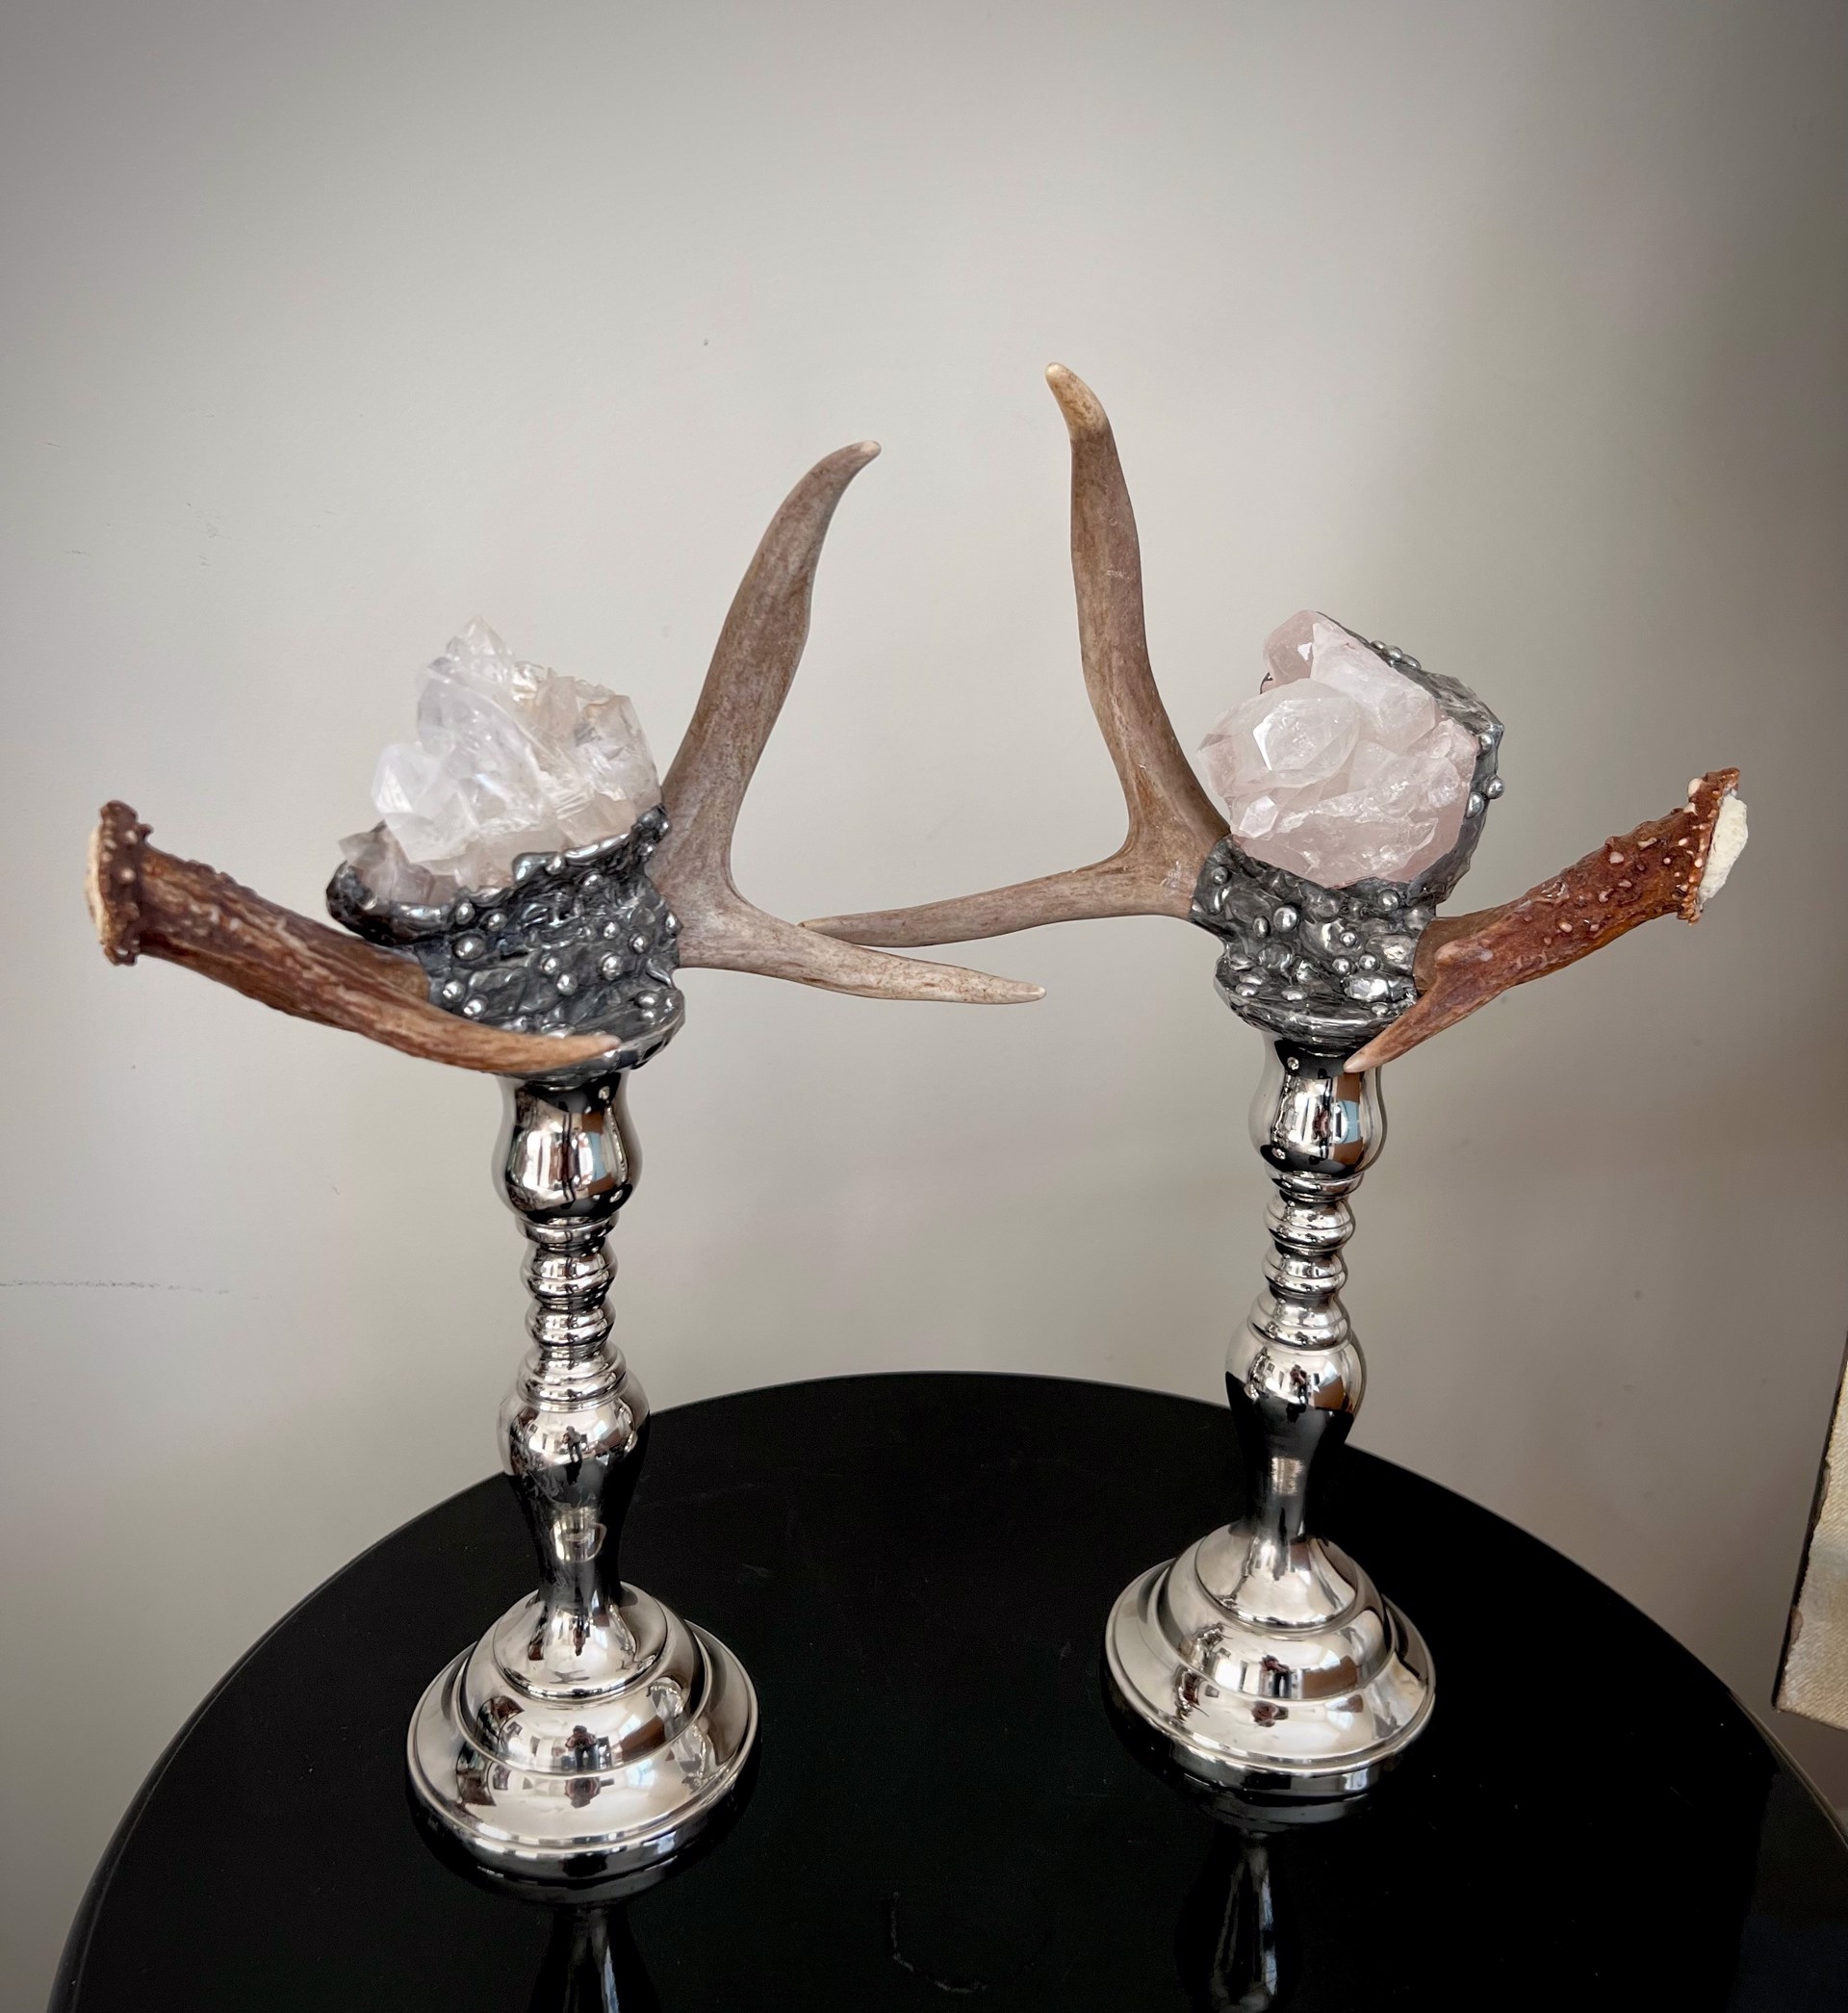 White Tail Antlers on Silver Candlesticks by Trinka 5 Designs